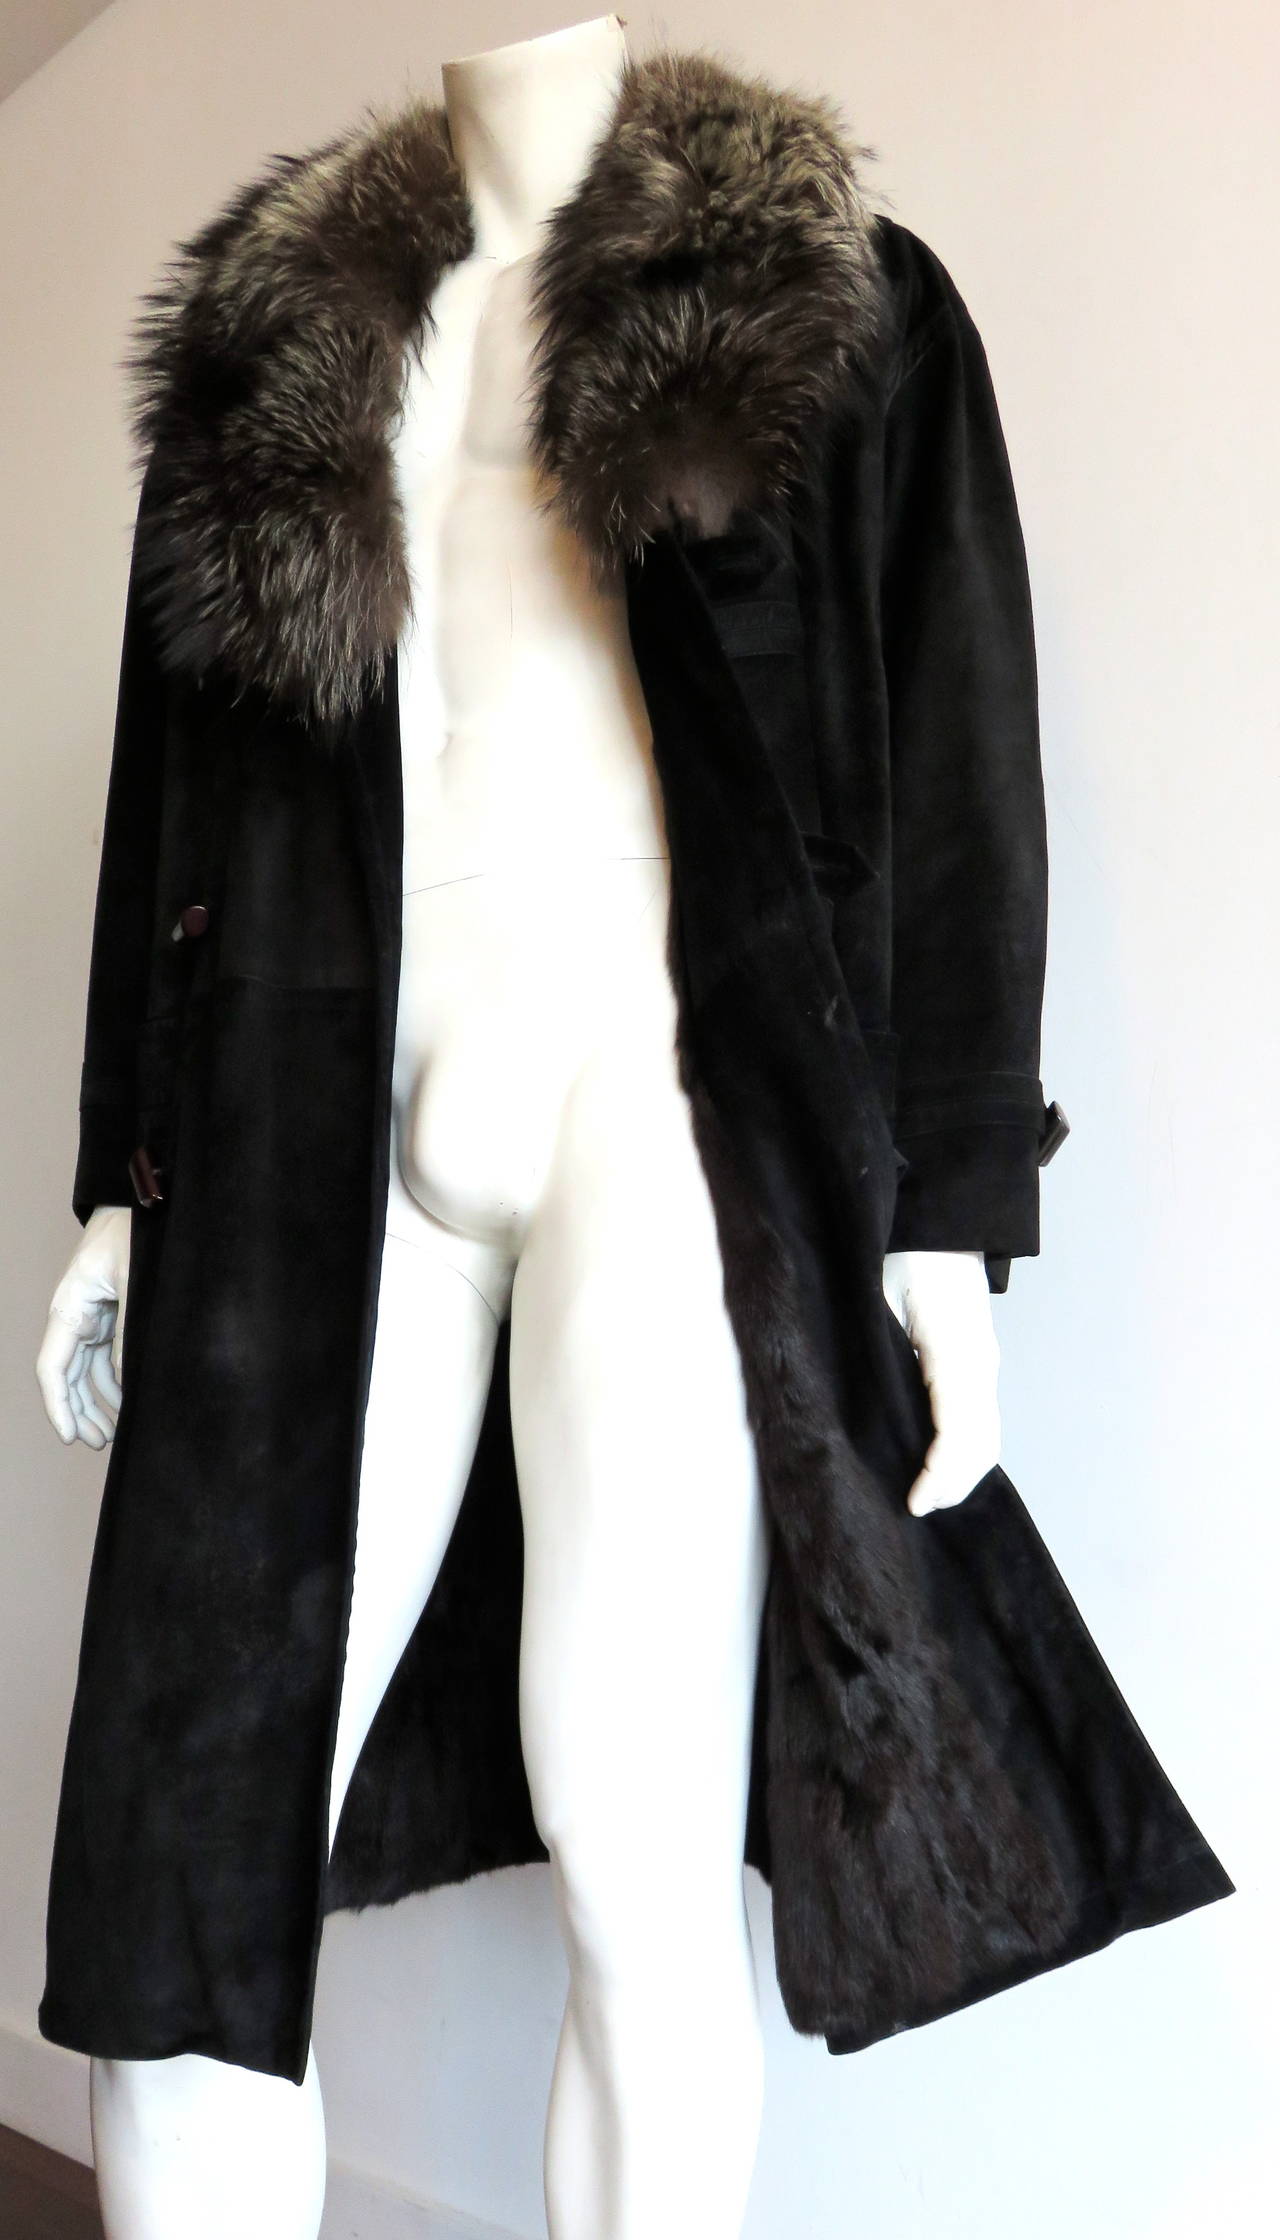 1980's ZILLI FRANCE Men's 'Corneille' model, calf suede and fur coat.

This ultra-luxurious, winter coat is made of black, calf-suede skin, and is fully lined in genuine, black squirrel fur.  The inside fur lining features a concealed, ventilation